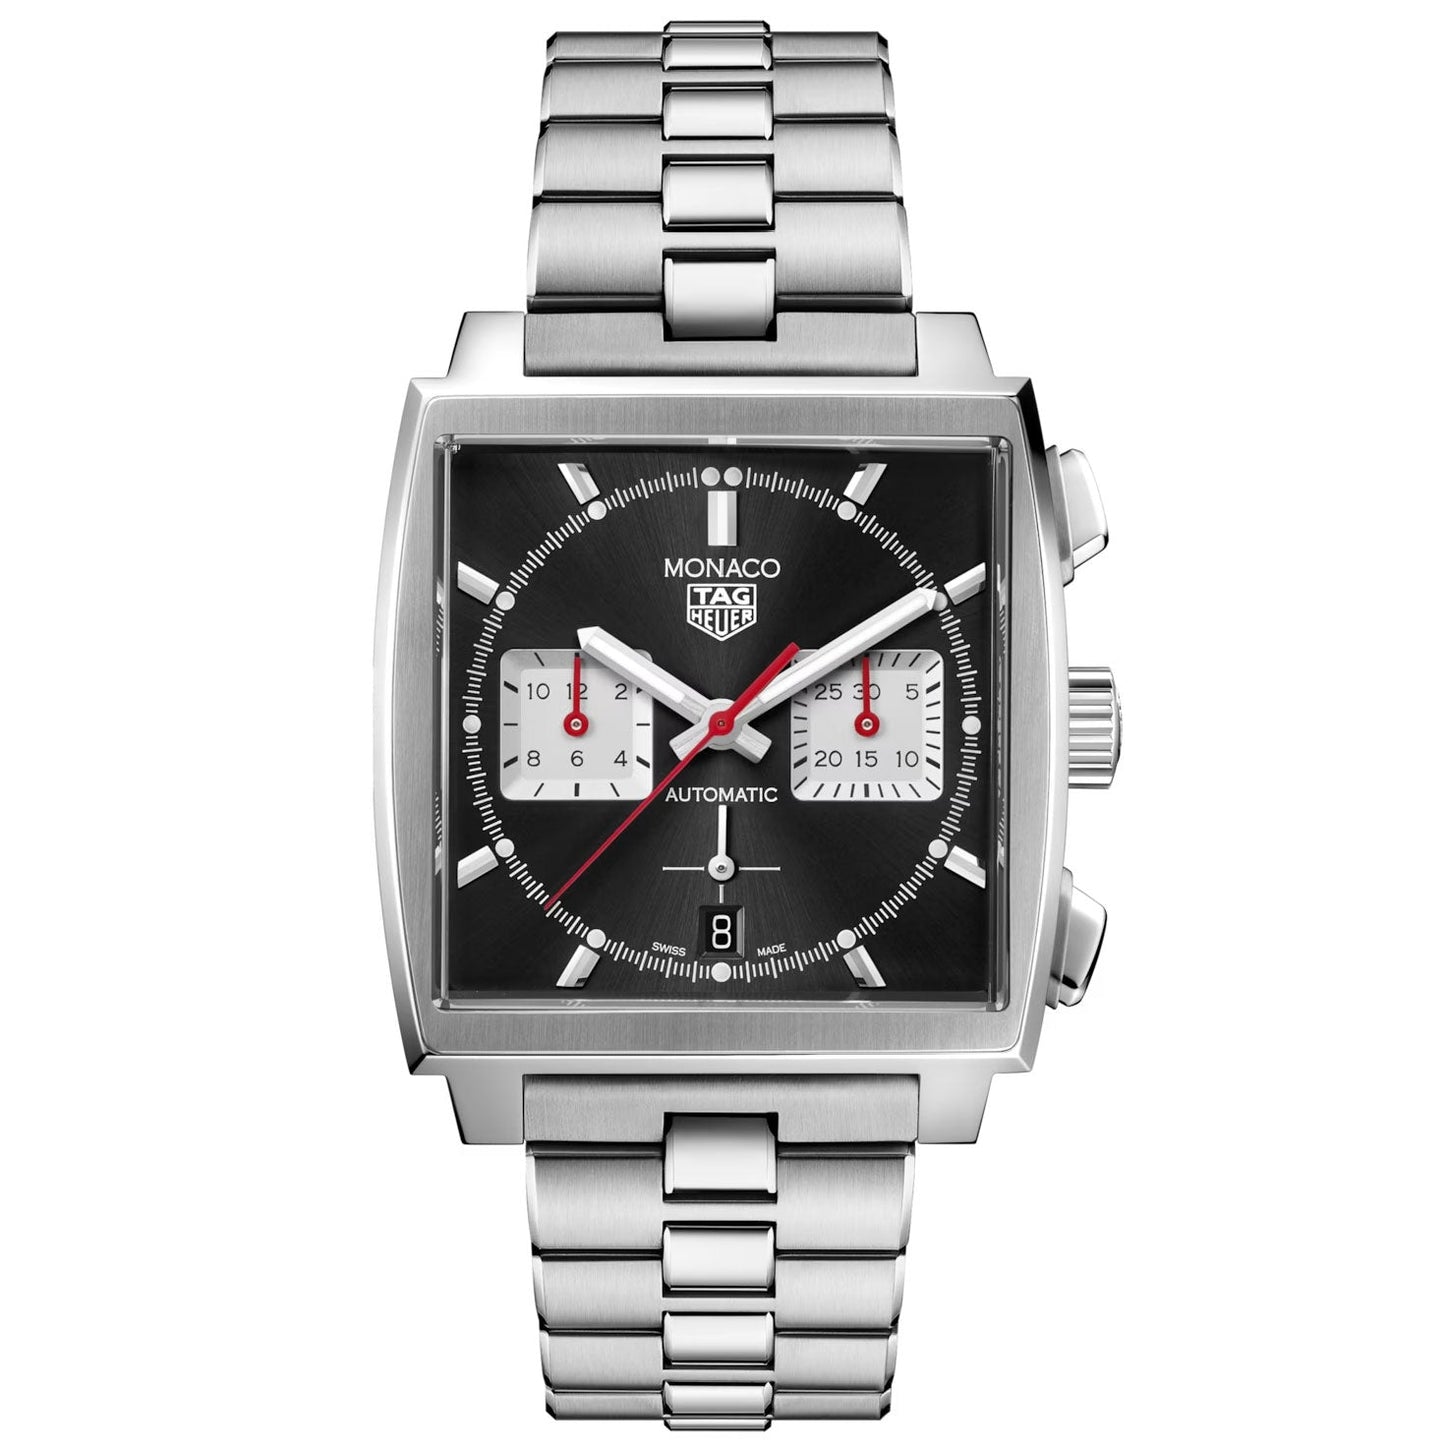 TAG Heuer Monaco Calibre HEUER02 Automatic Chronograph 39mm Watch